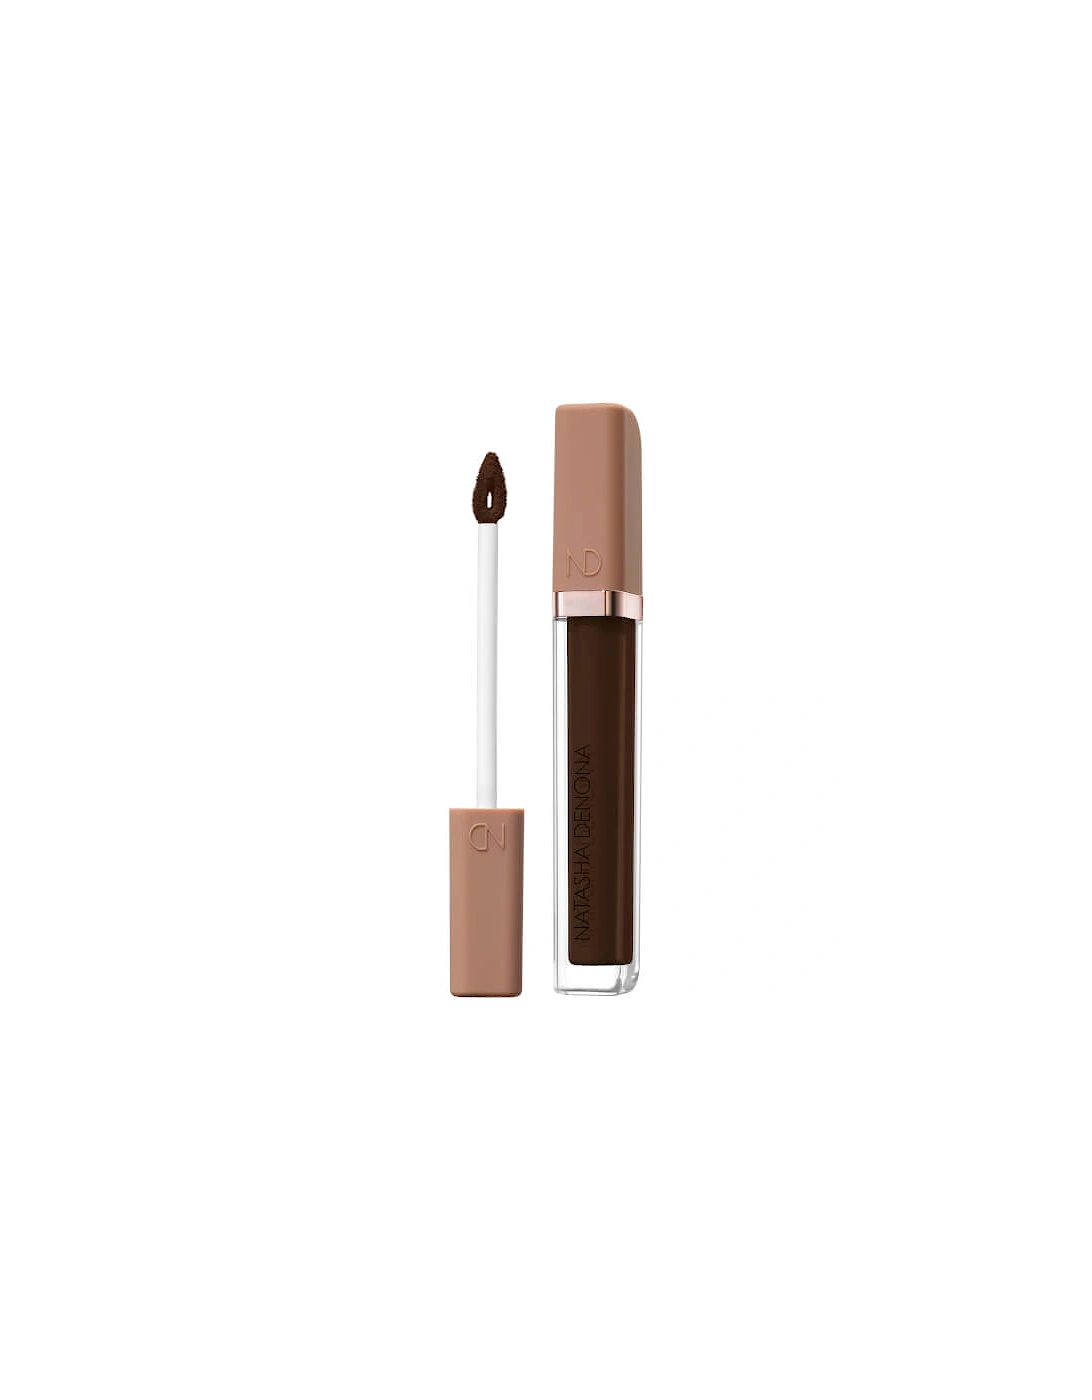 Hy-Glam Concealer - NY16, 2 of 1